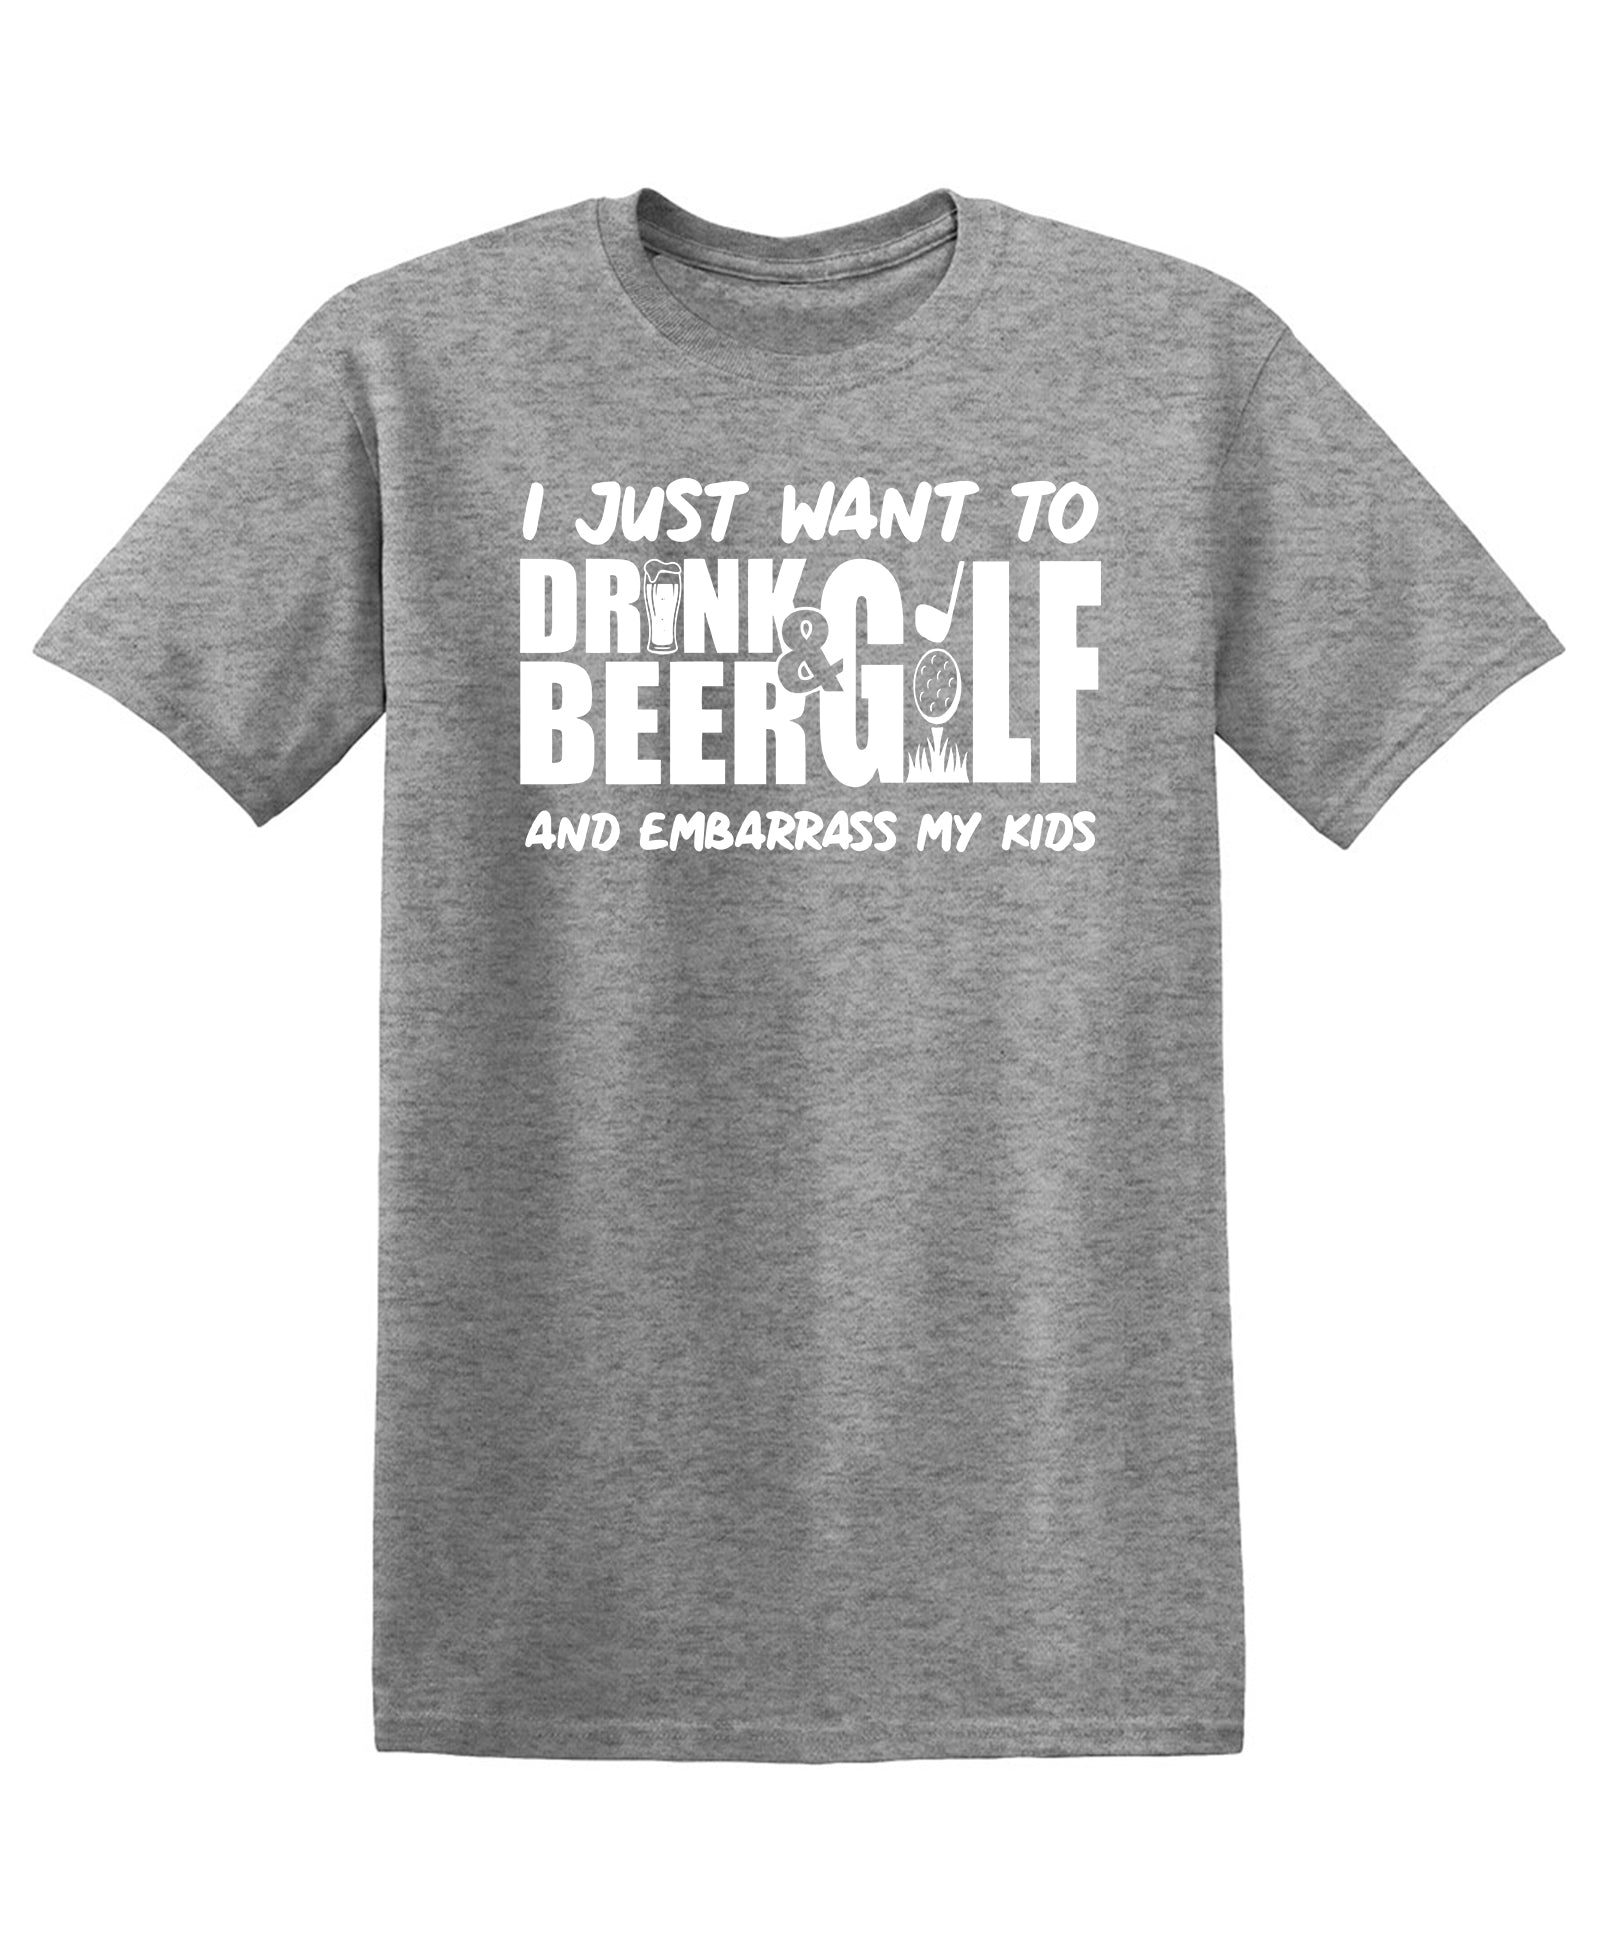 I Just Want To Drink Beer & Golf And Embarrass My Kids - Funny T Shirts & Graphic Tees